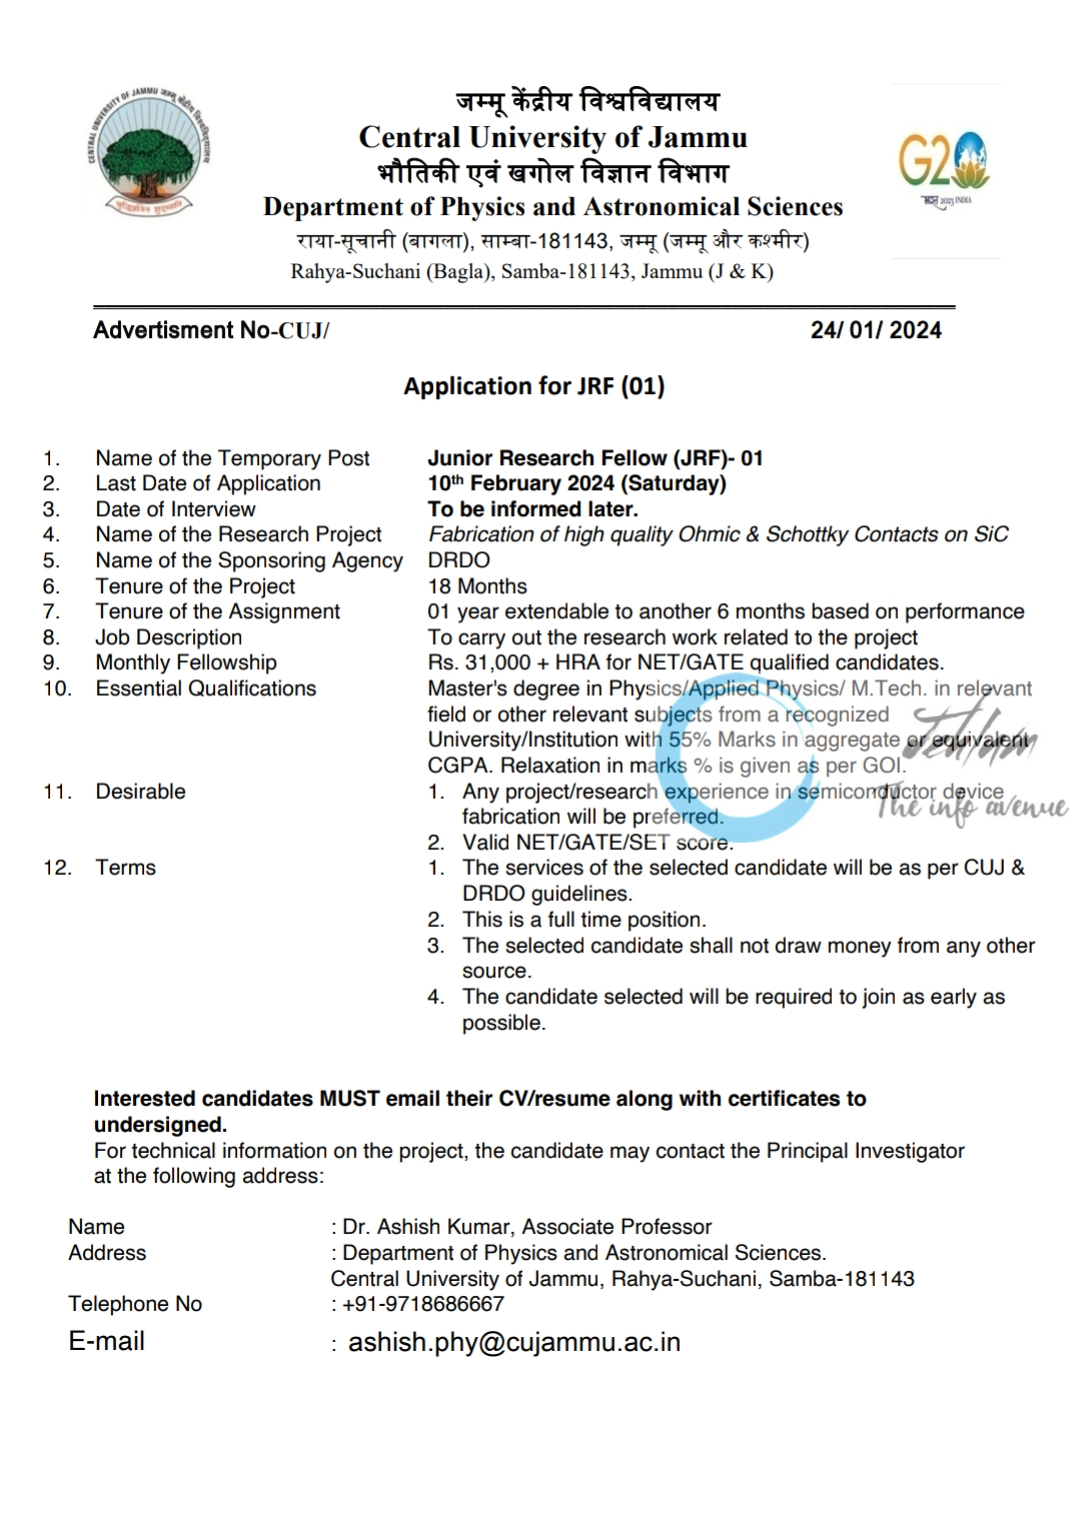 Central University of Jammu Department of Physics and Astronomical Sciences Junior Research Fellow JRF Advertisement 2024